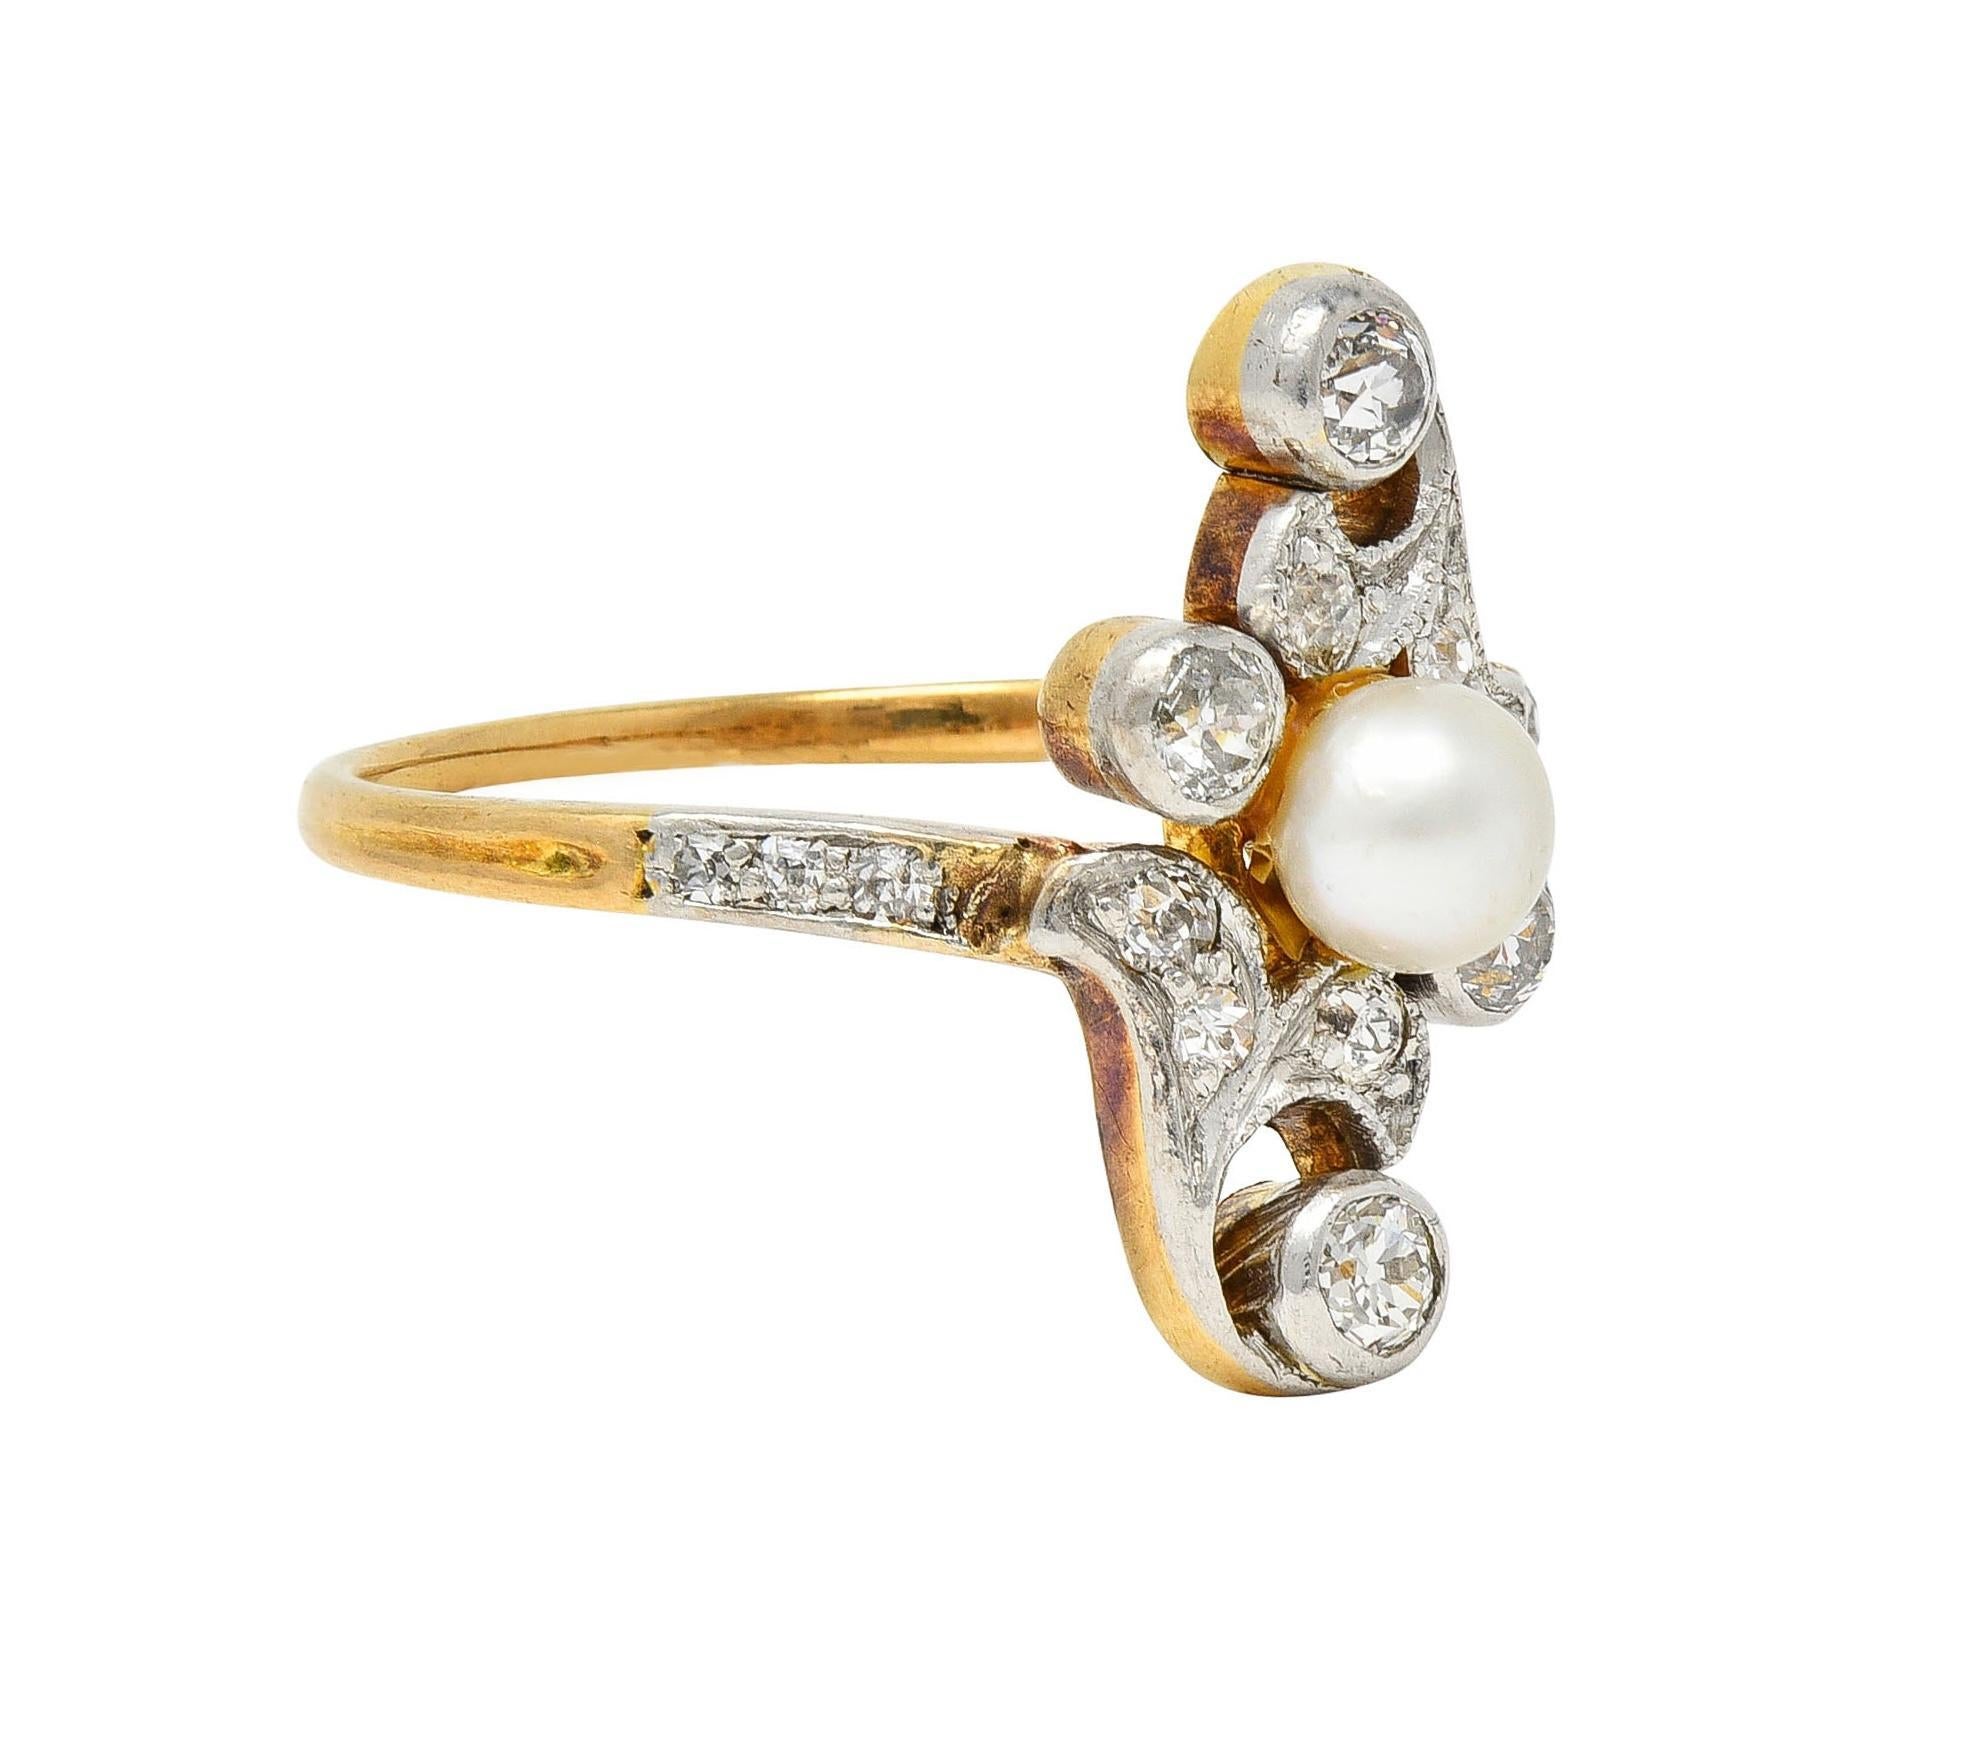 Designed as a bypass style navette form with pierced platinum-topped ginkgo leaf motif 
Centering a 4.3 mm round pearl - white with moderate iridescence
Bead and bezel set throughout with old European cut diamonds 
Weighing approximately 0.44 carat